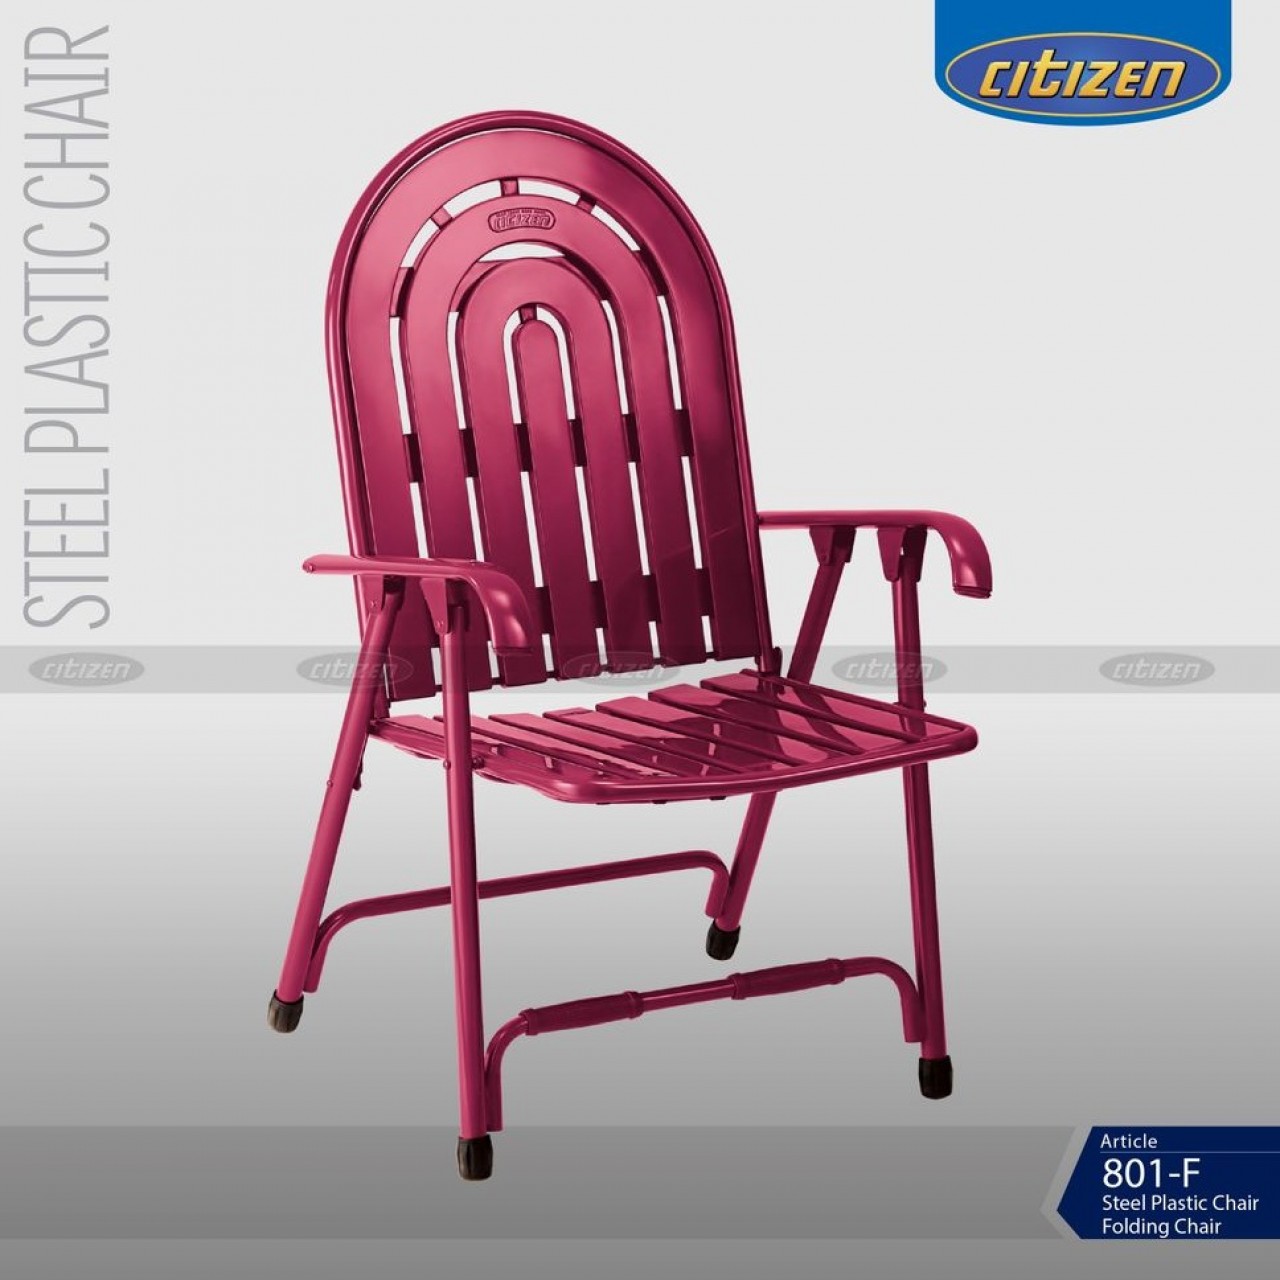 Citizen 801-F Steel & Plastic Folding Chair With Arms